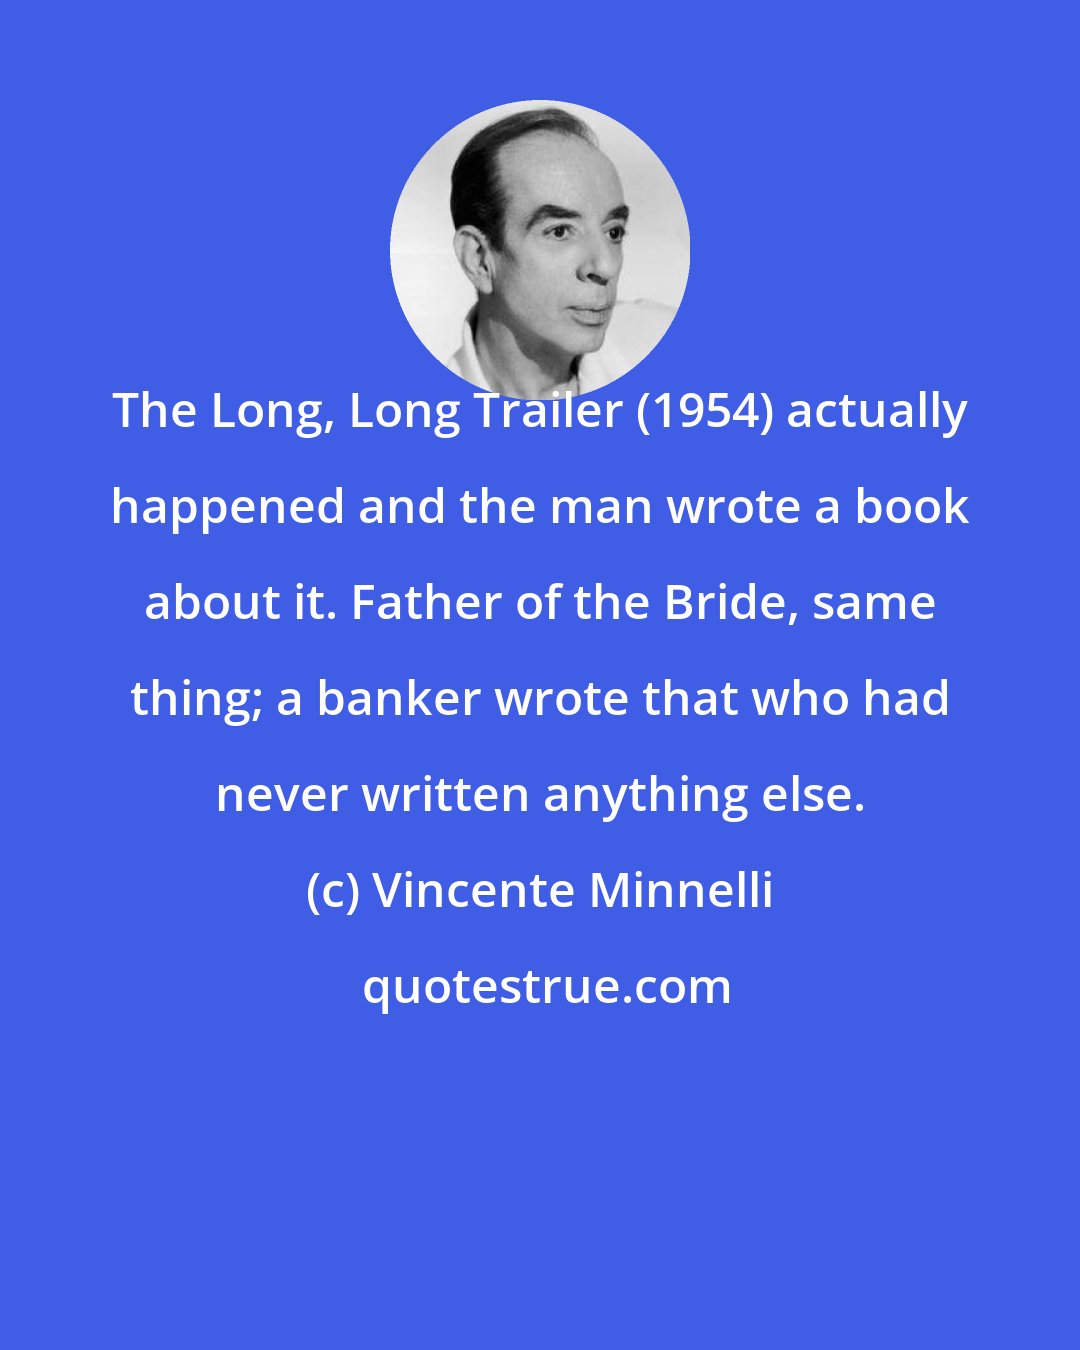 Vincente Minnelli: The Long, Long Trailer (1954) actually happened and the man wrote a book about it. Father of the Bride, same thing; a banker wrote that who had never written anything else.